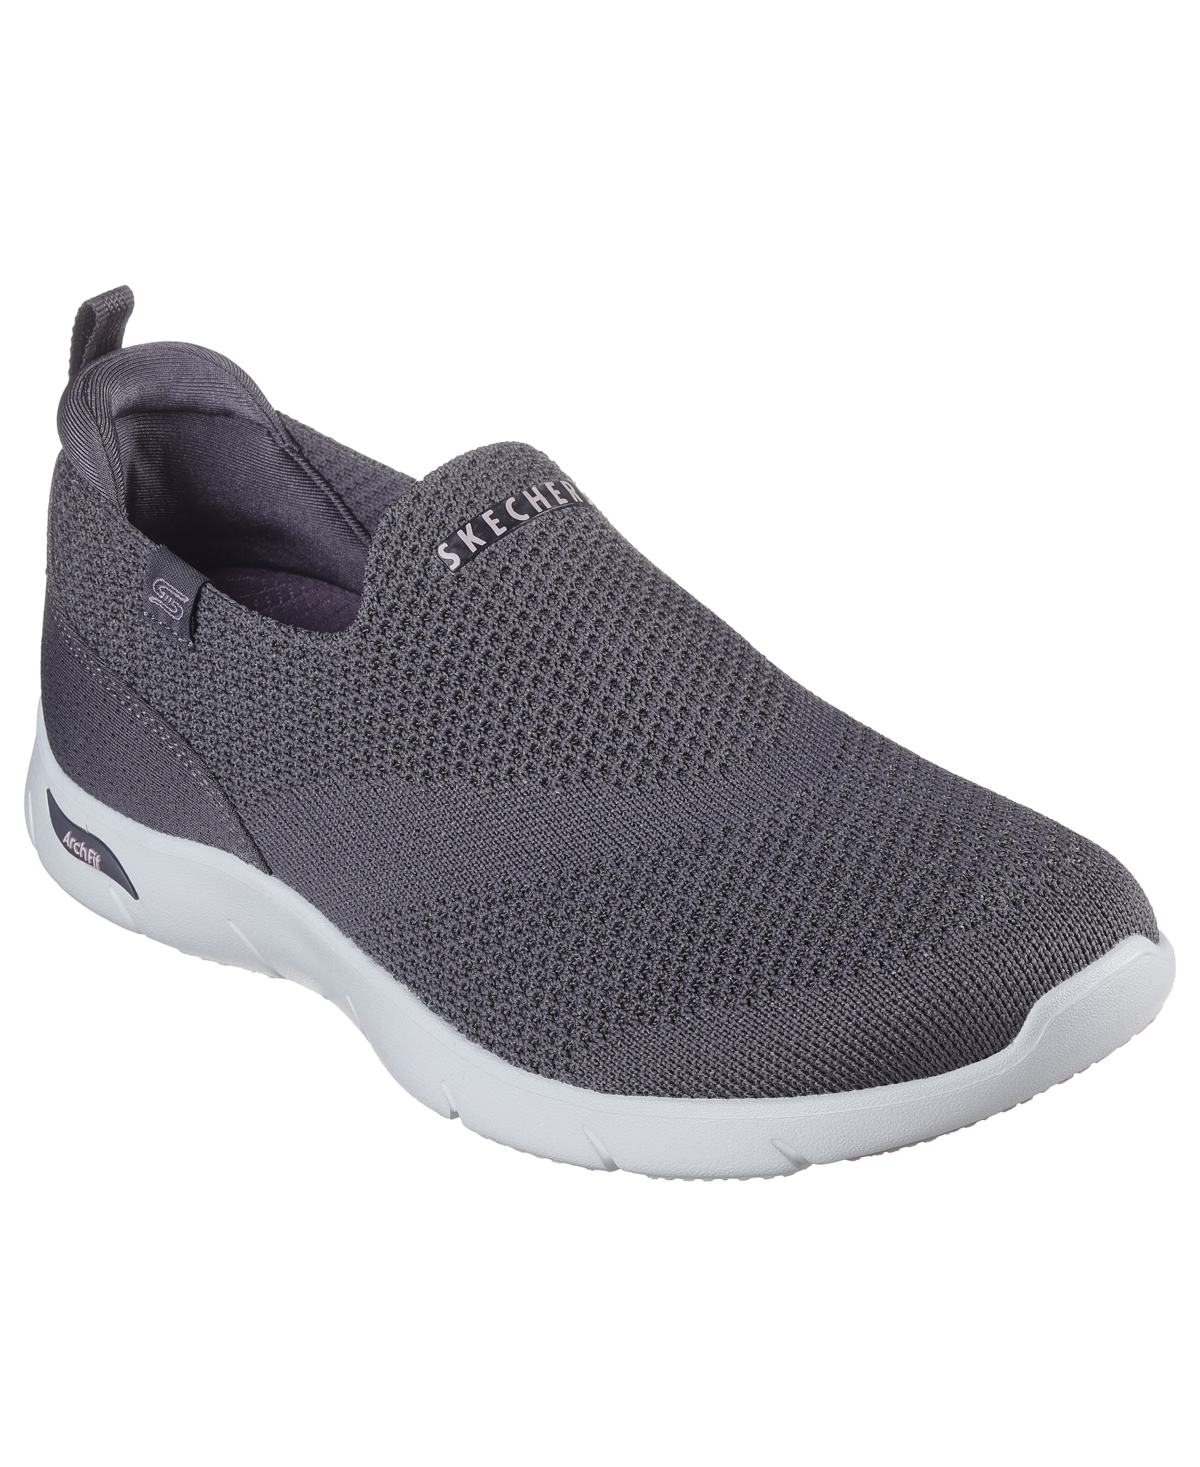 Women's Arch Fit Refine - Iris Slip-On Casual Sneakers from Finish Line - Char-charc